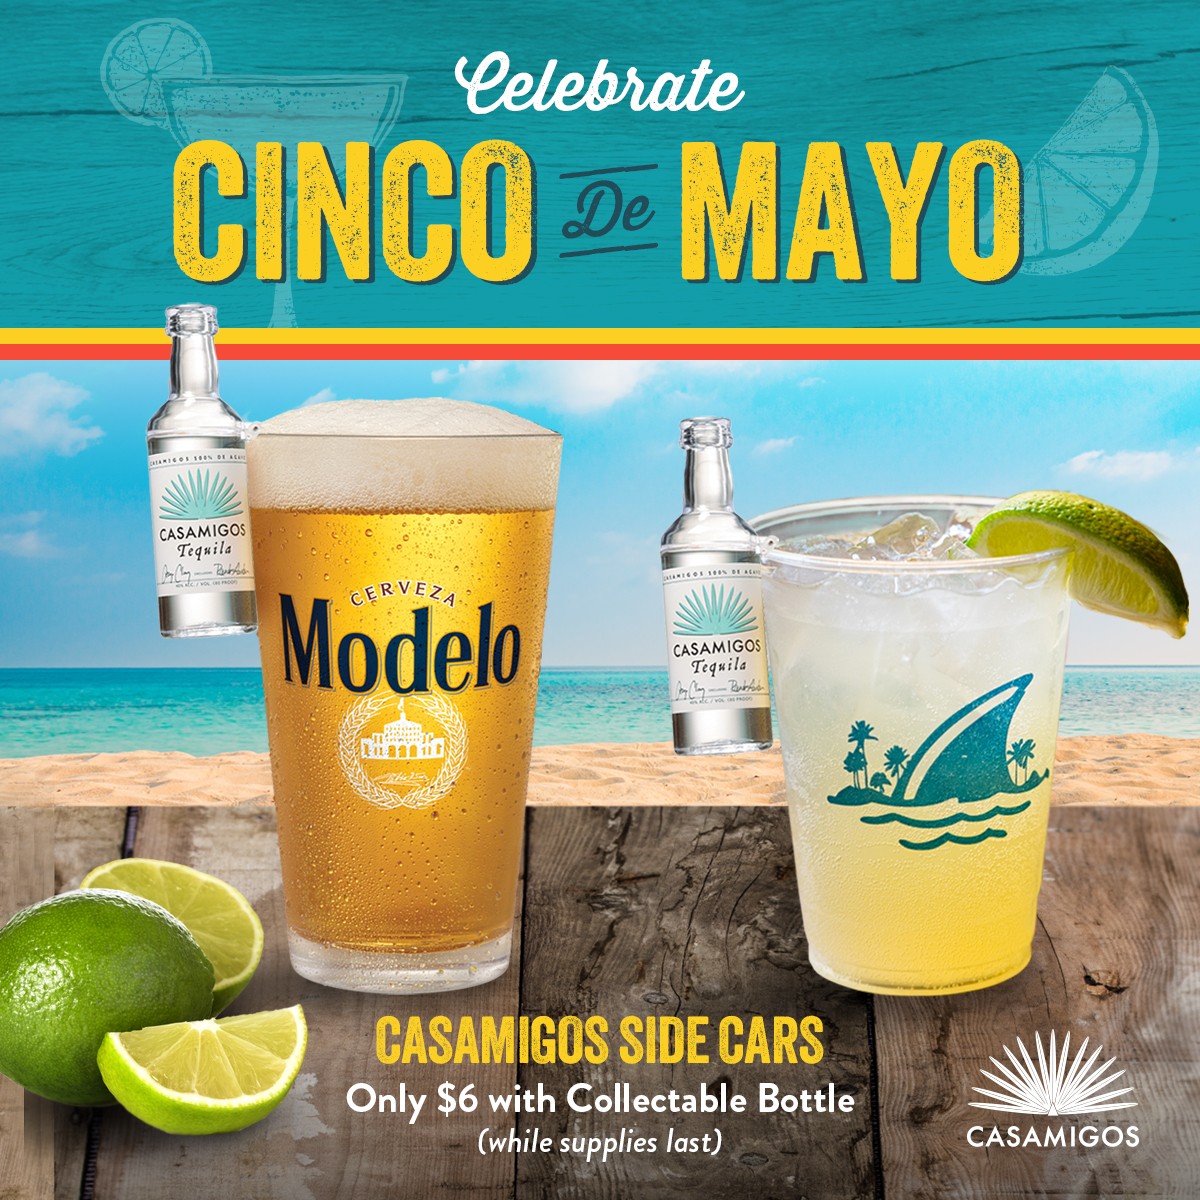 Celebrate Cinco de Mayo in style with our exclusive Casamigos souvenir bottle sidecars! Grab yours for just $6! 🌟